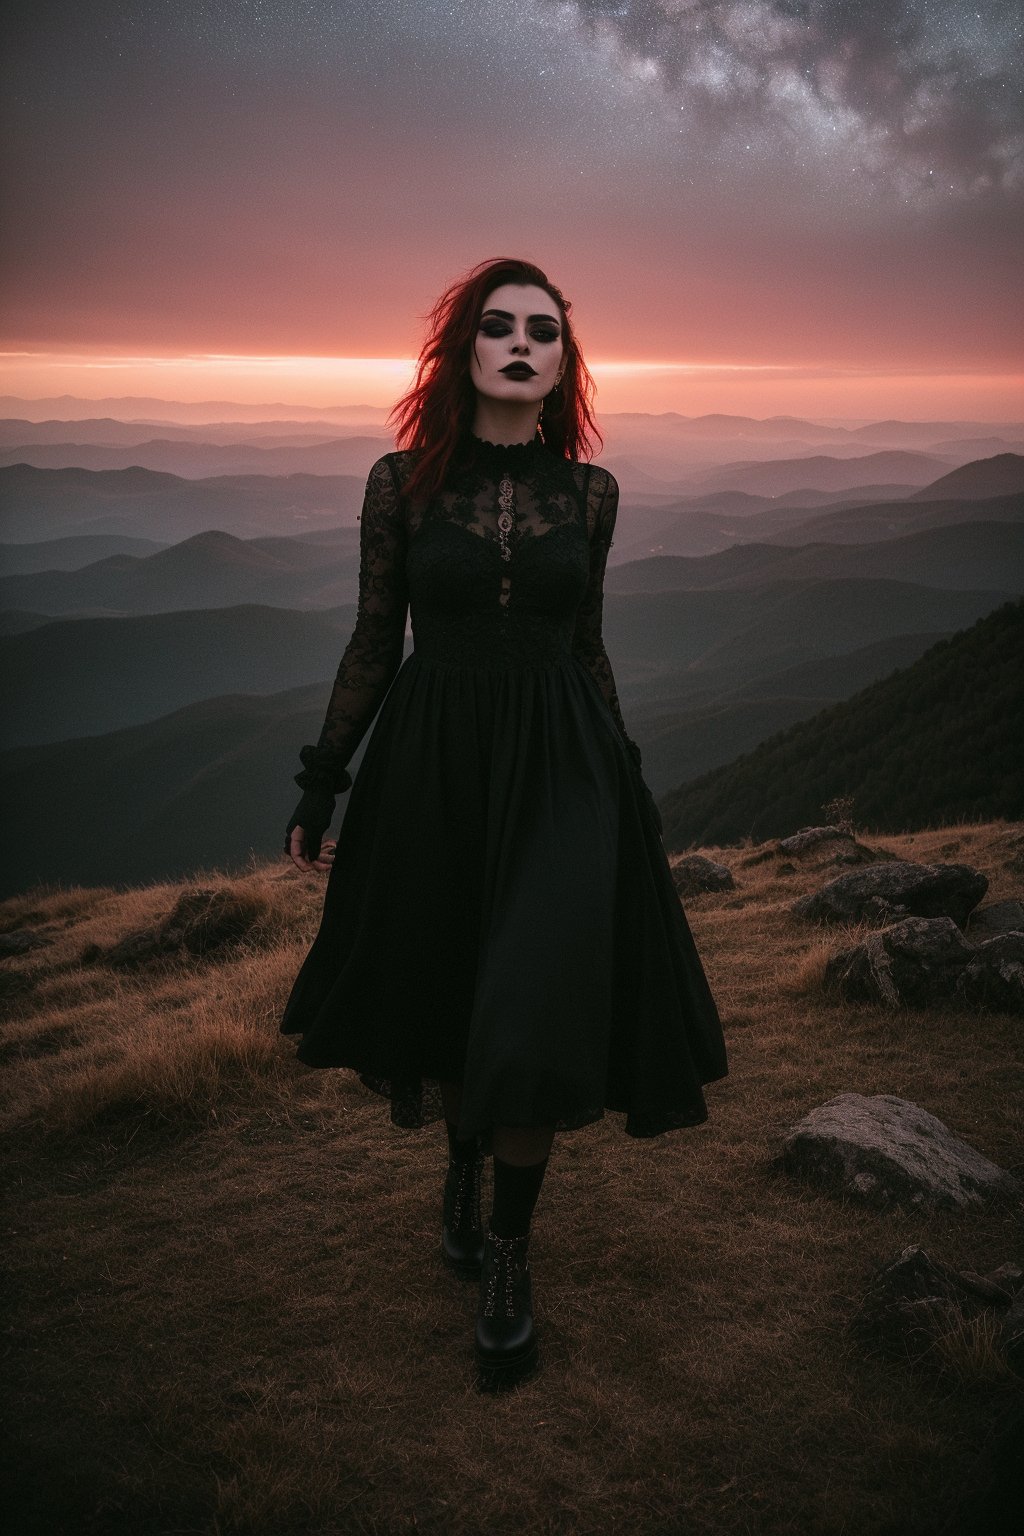 A goth girl stands atop a mountain, her short black dress billowing in the wind as she gazes out at the starry sky. Platform shoes add height to her imposing figure, while face tattoos and bold black lipstick accentuate her mysterious persona. Her hair flows freely, framing her features as the atmospheric lighting casts long shadows on the rugged terrain. The 35mm photograph captures every intricate detail with professional precision, highlighting red hues in a moody, epic, and gorgeous composition.